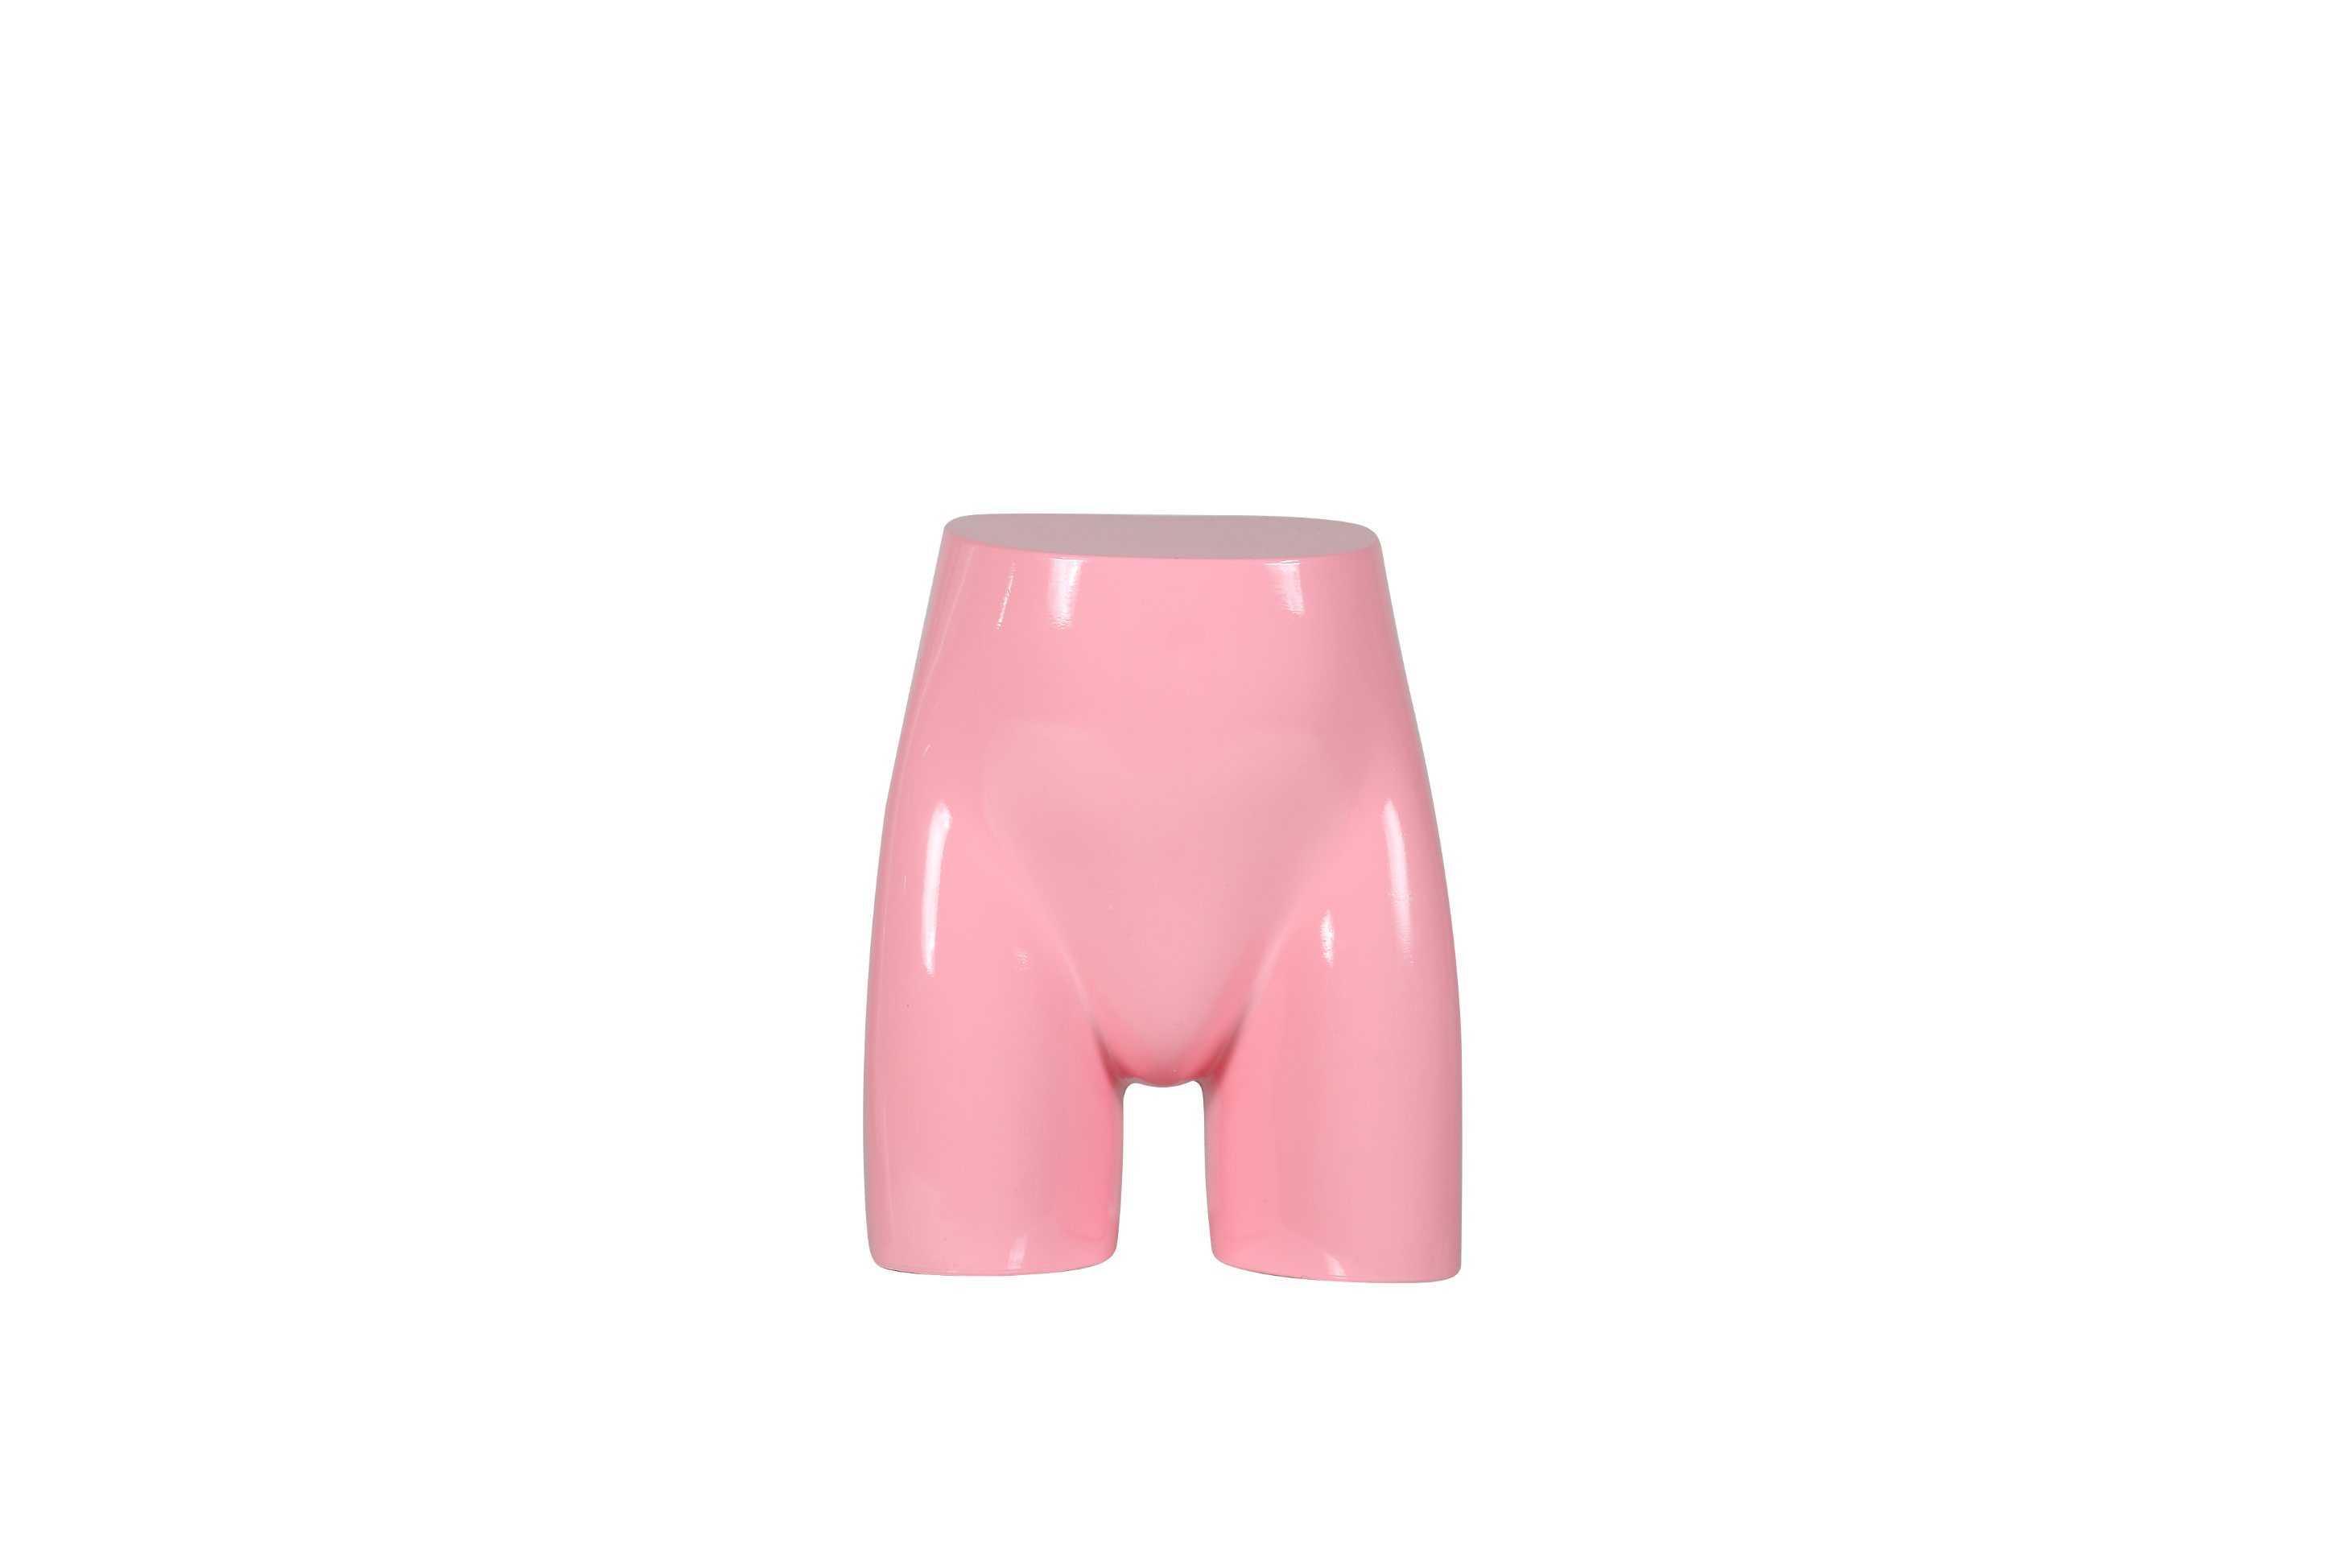 Bright Color Kids Underpants Display Mannequin